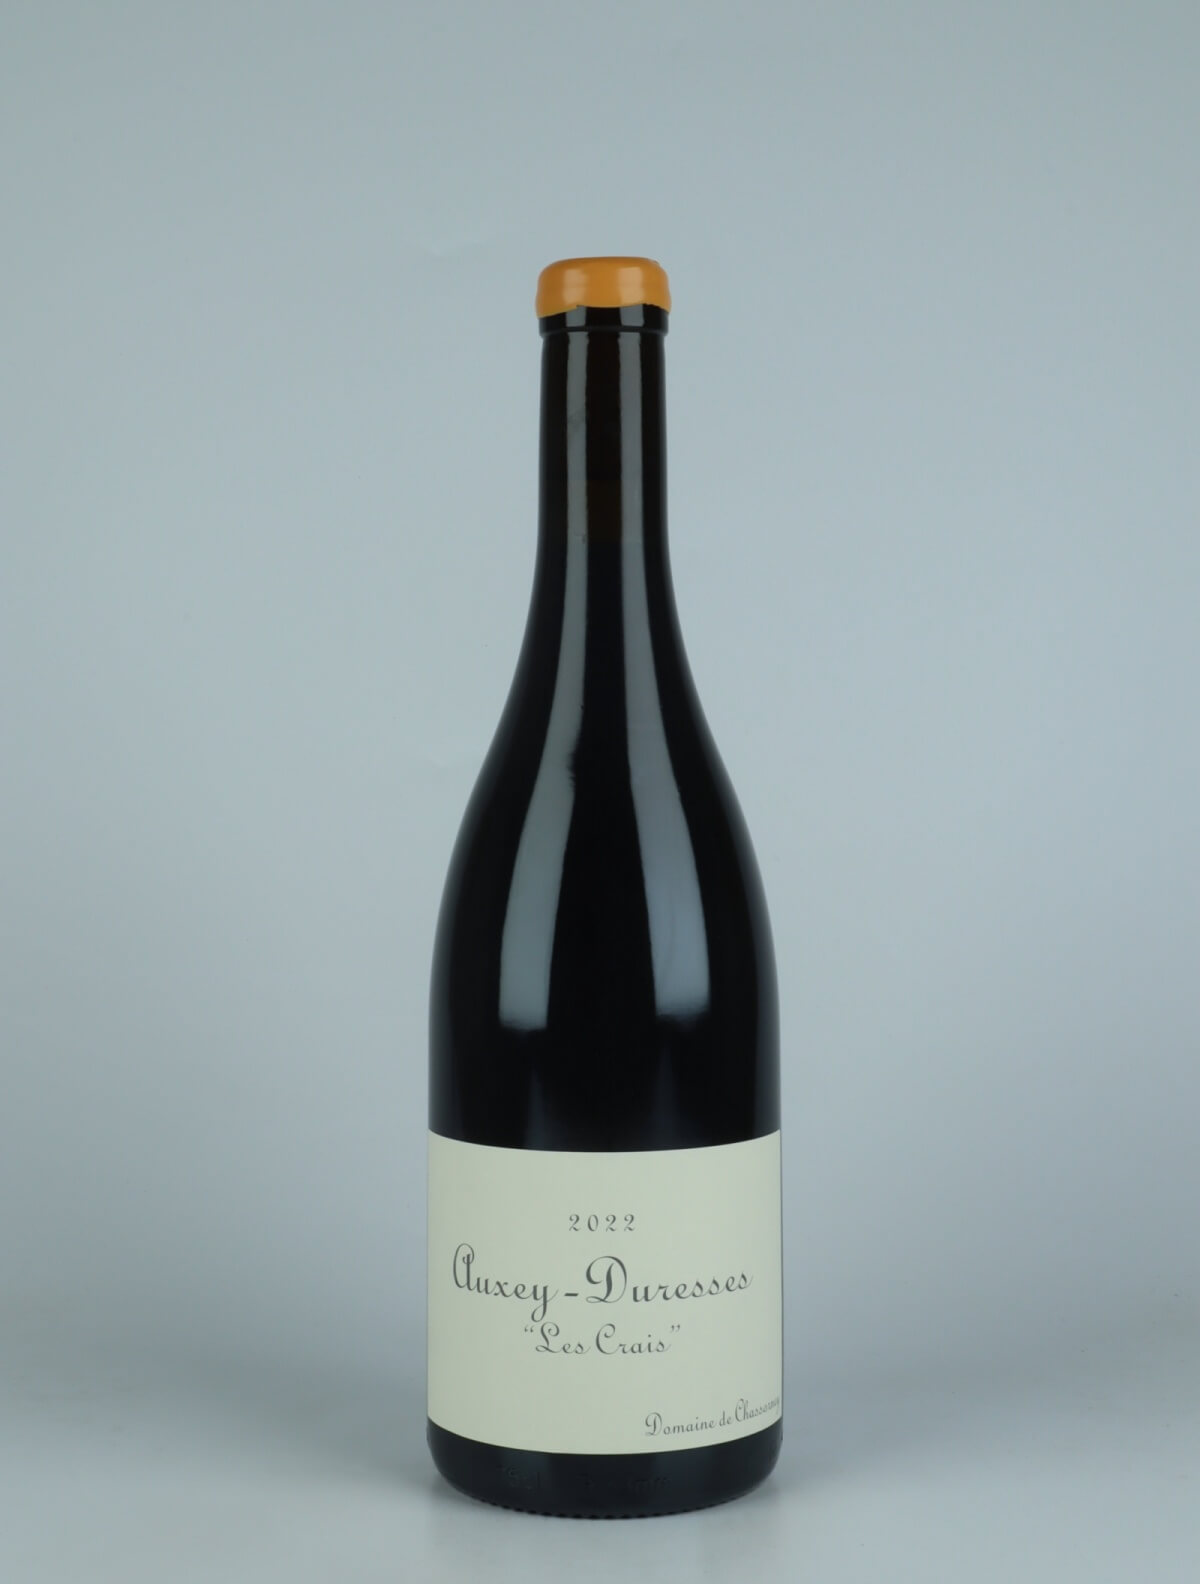 A bottle 2022 Auxey Duresses Rouge - Les Crais Red wine from Domaine de Chassorney, Burgundy in France